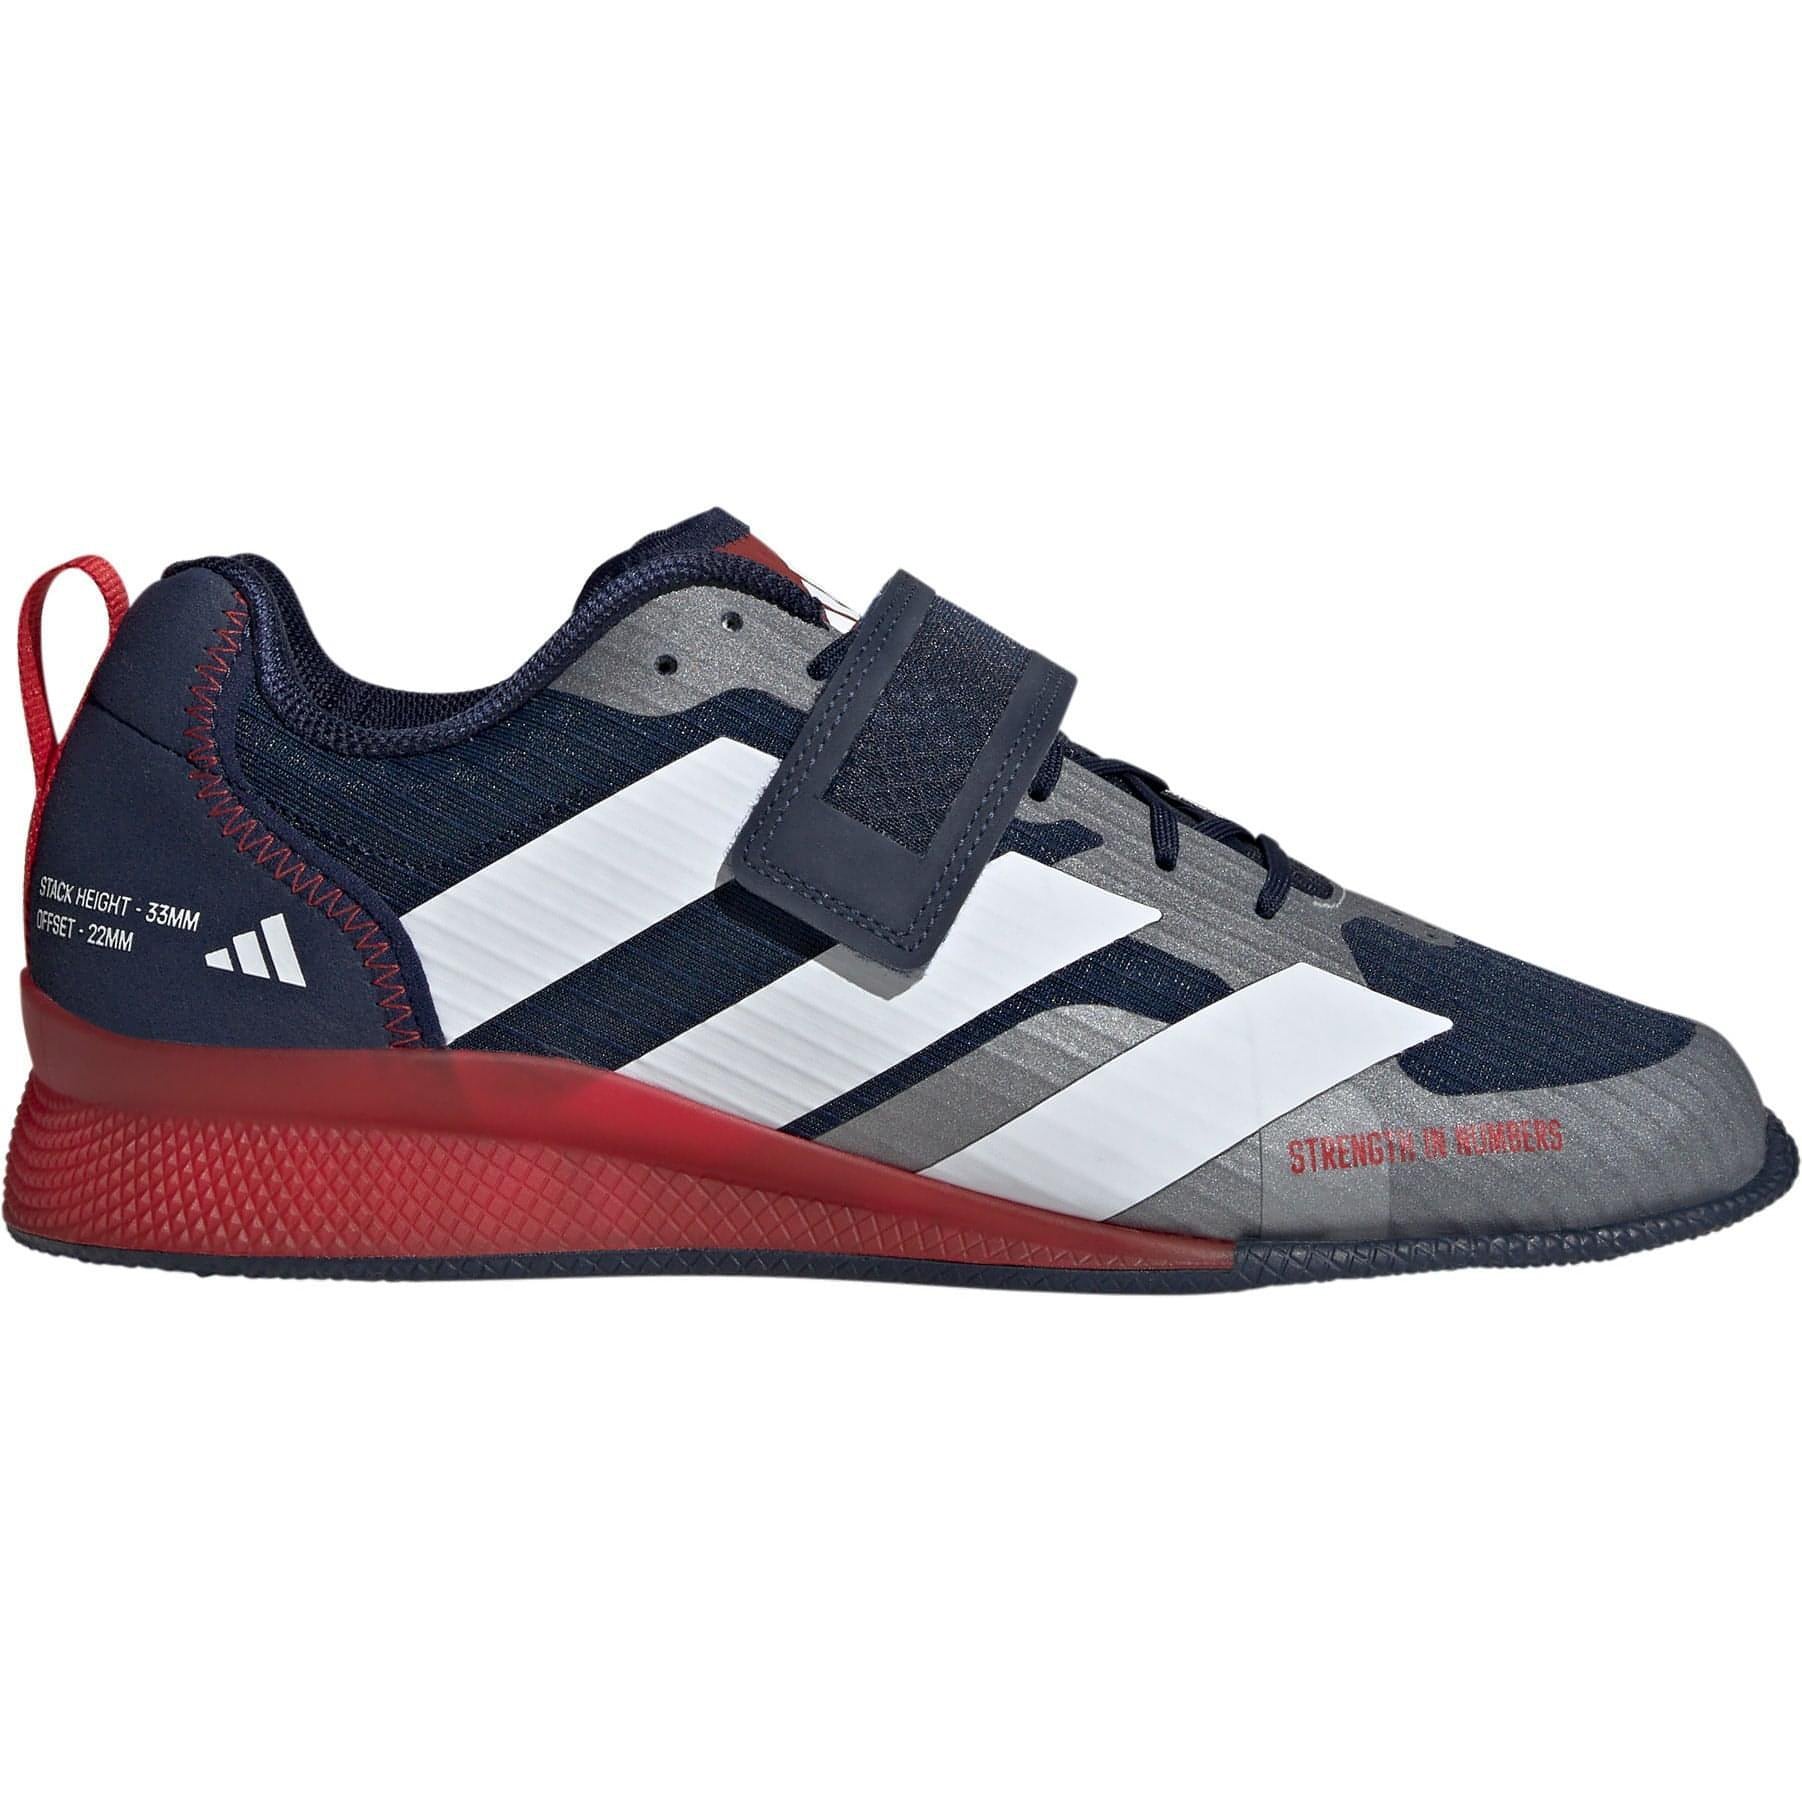 Adidas Adipower Weightlifting Shoes Hq3527